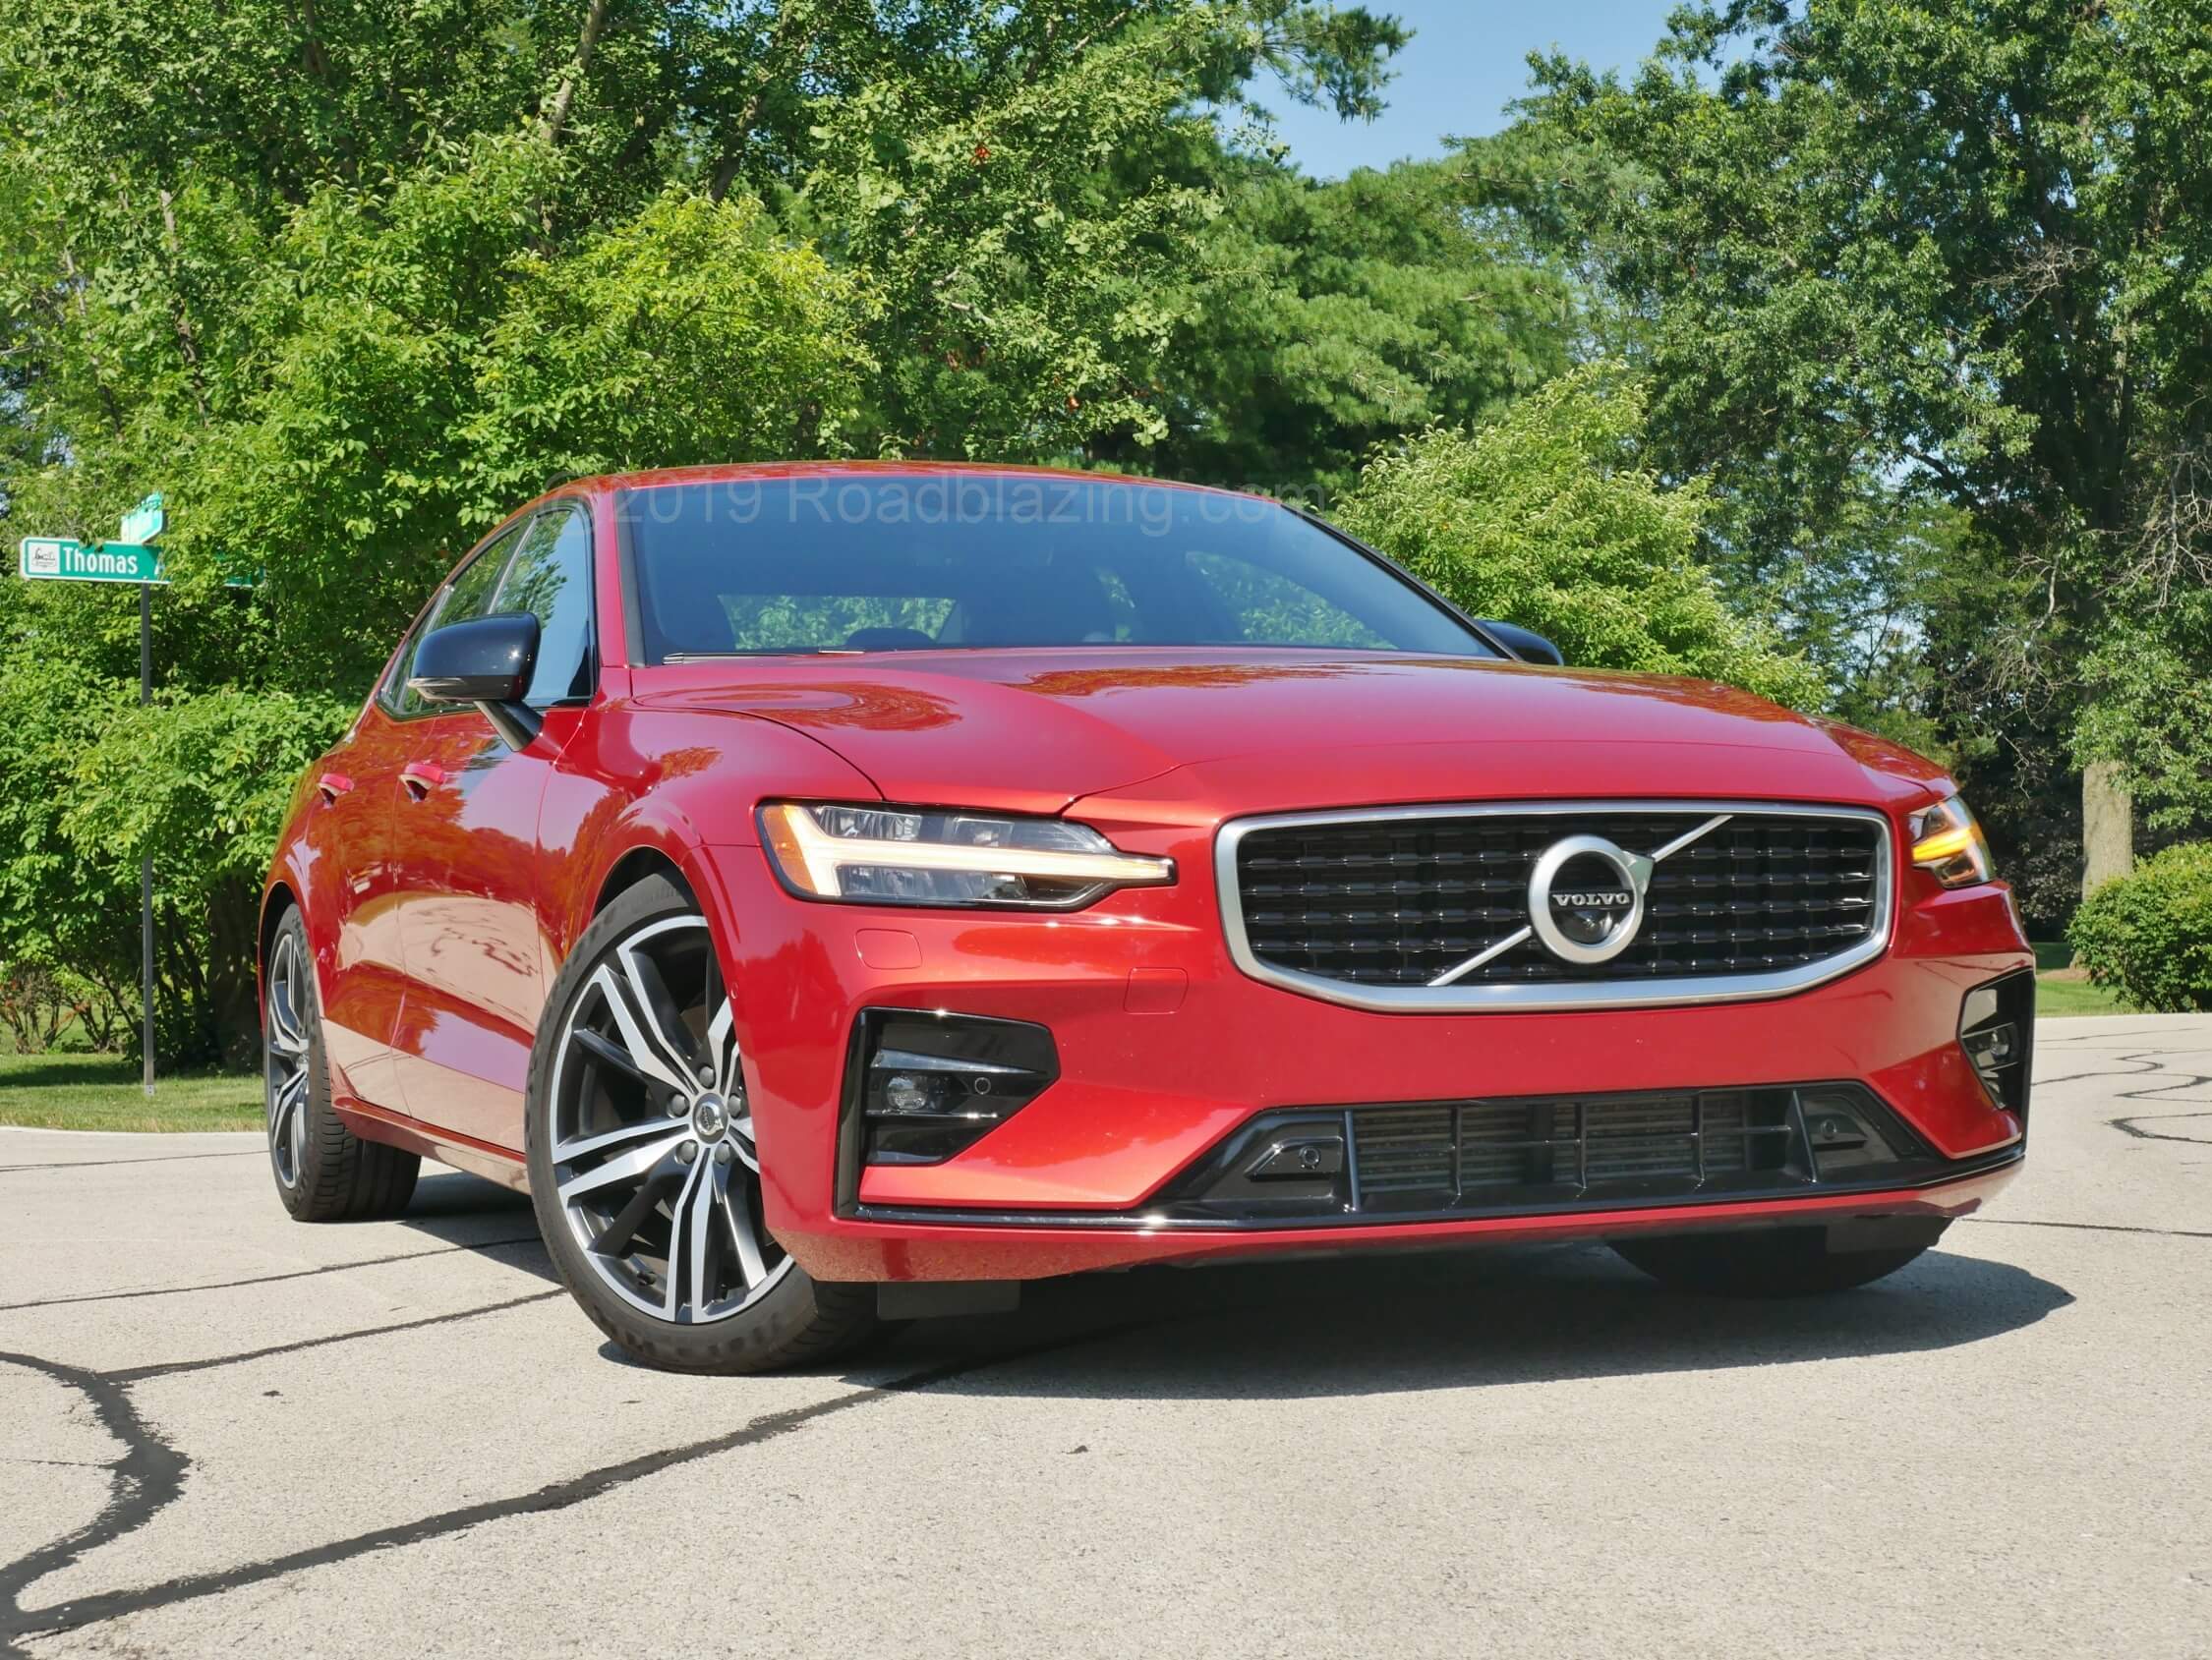 2019 Volvo S60 T6 R-Design: Judiciously sized & cinched grille and subtly darkened straked lower corners and center airdam make way for Thor's Hammer alternating amber directionals / white DRLs.